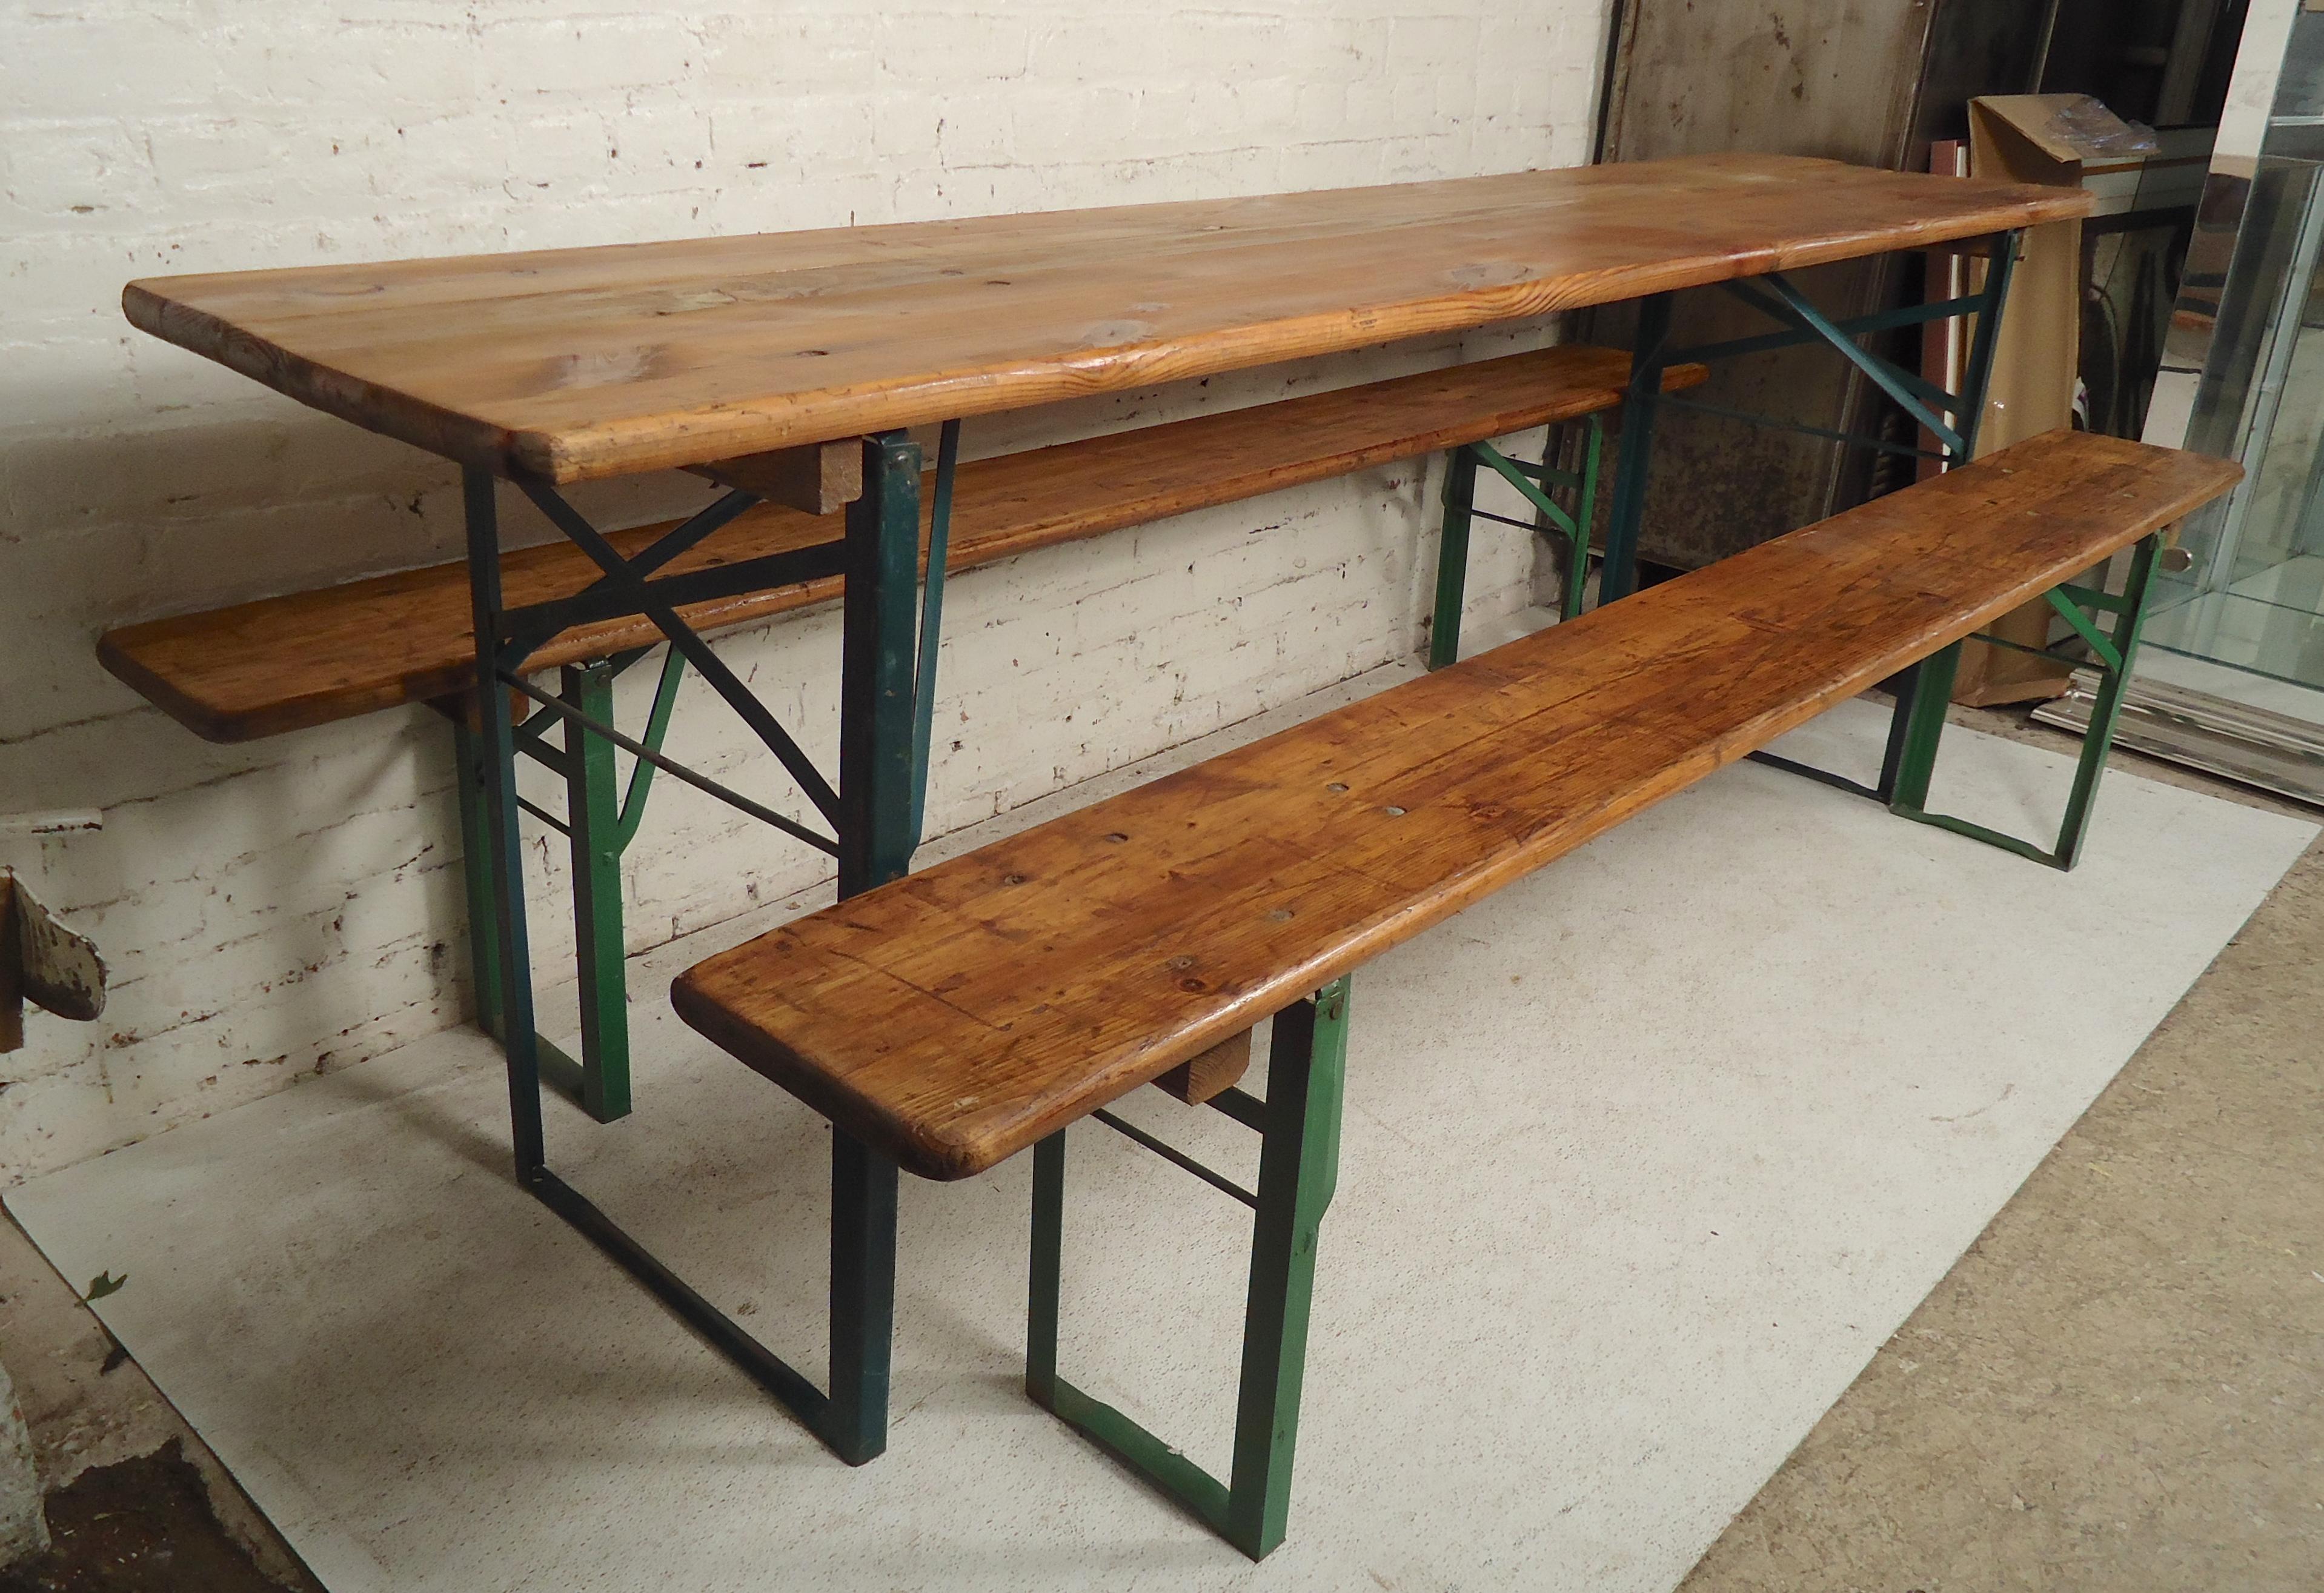 Vintage picnic/beer garden set with long table and two benches. All metal legs fold in for easy moving.

(Please confirm item location - NY or NJ - with dealer).
 